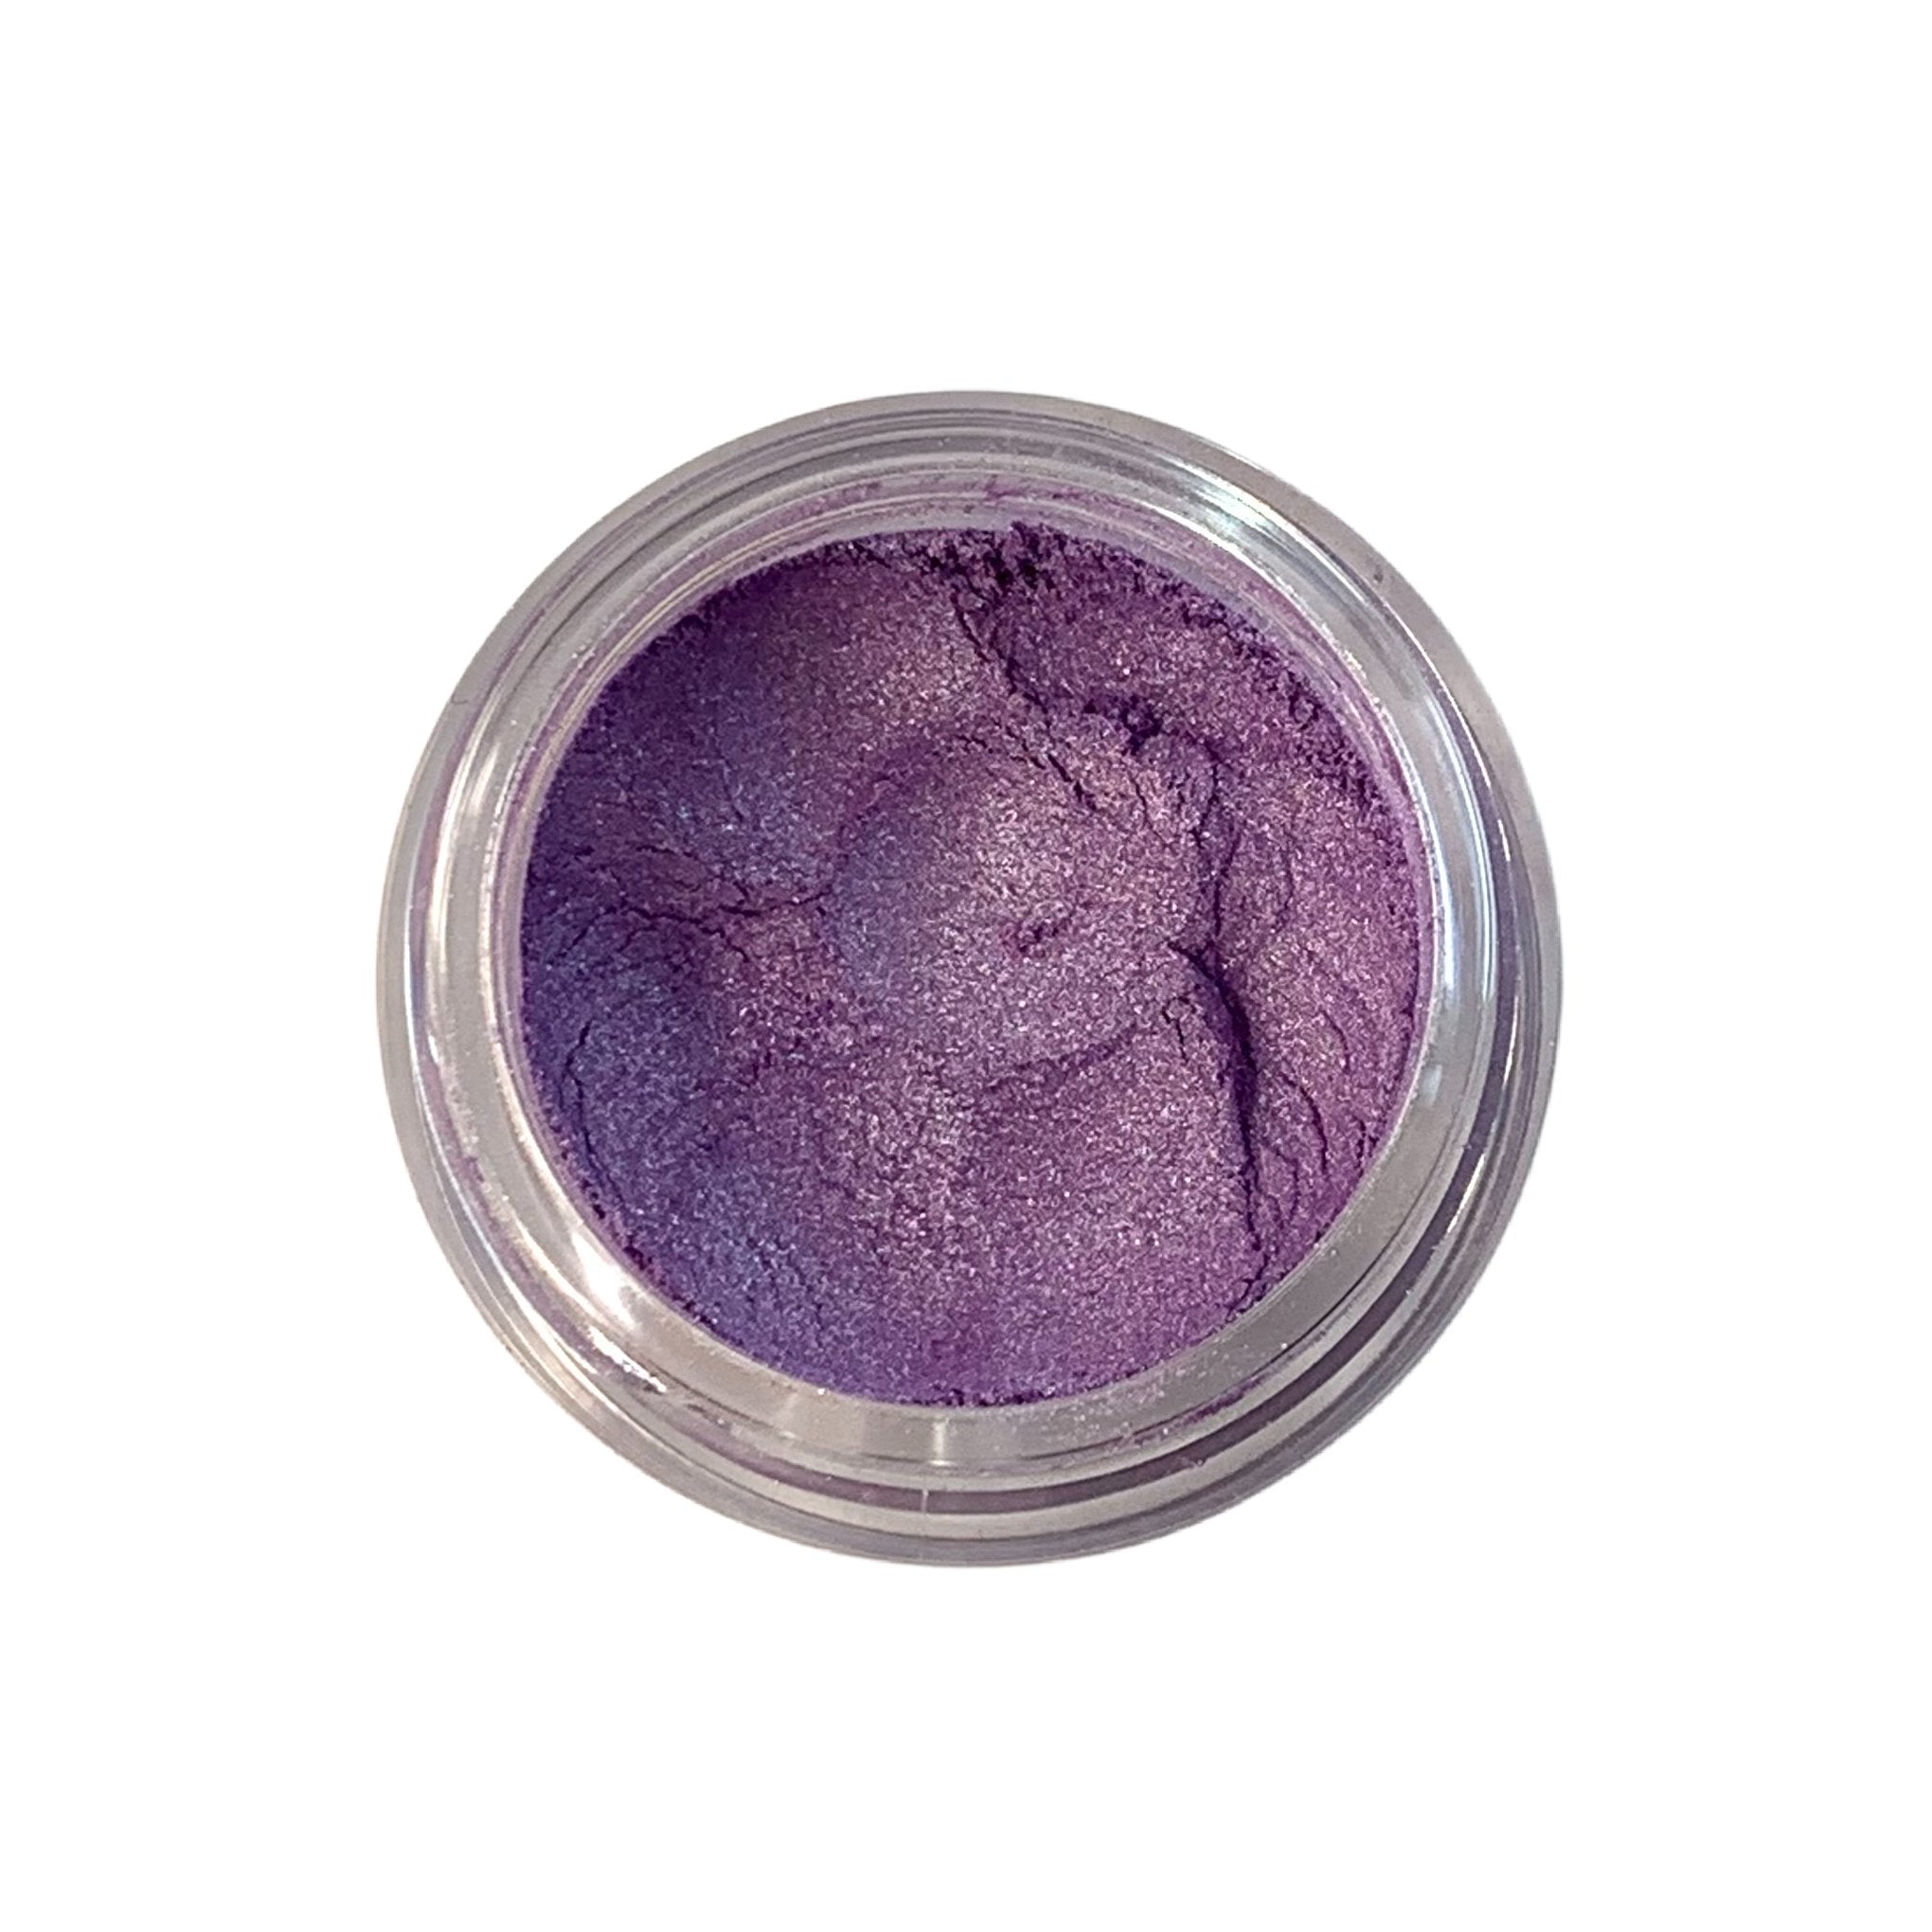 lavender loose mineral eyeshadow. a light purple color. 10 gram sifter jar. vegan and cruelty free.